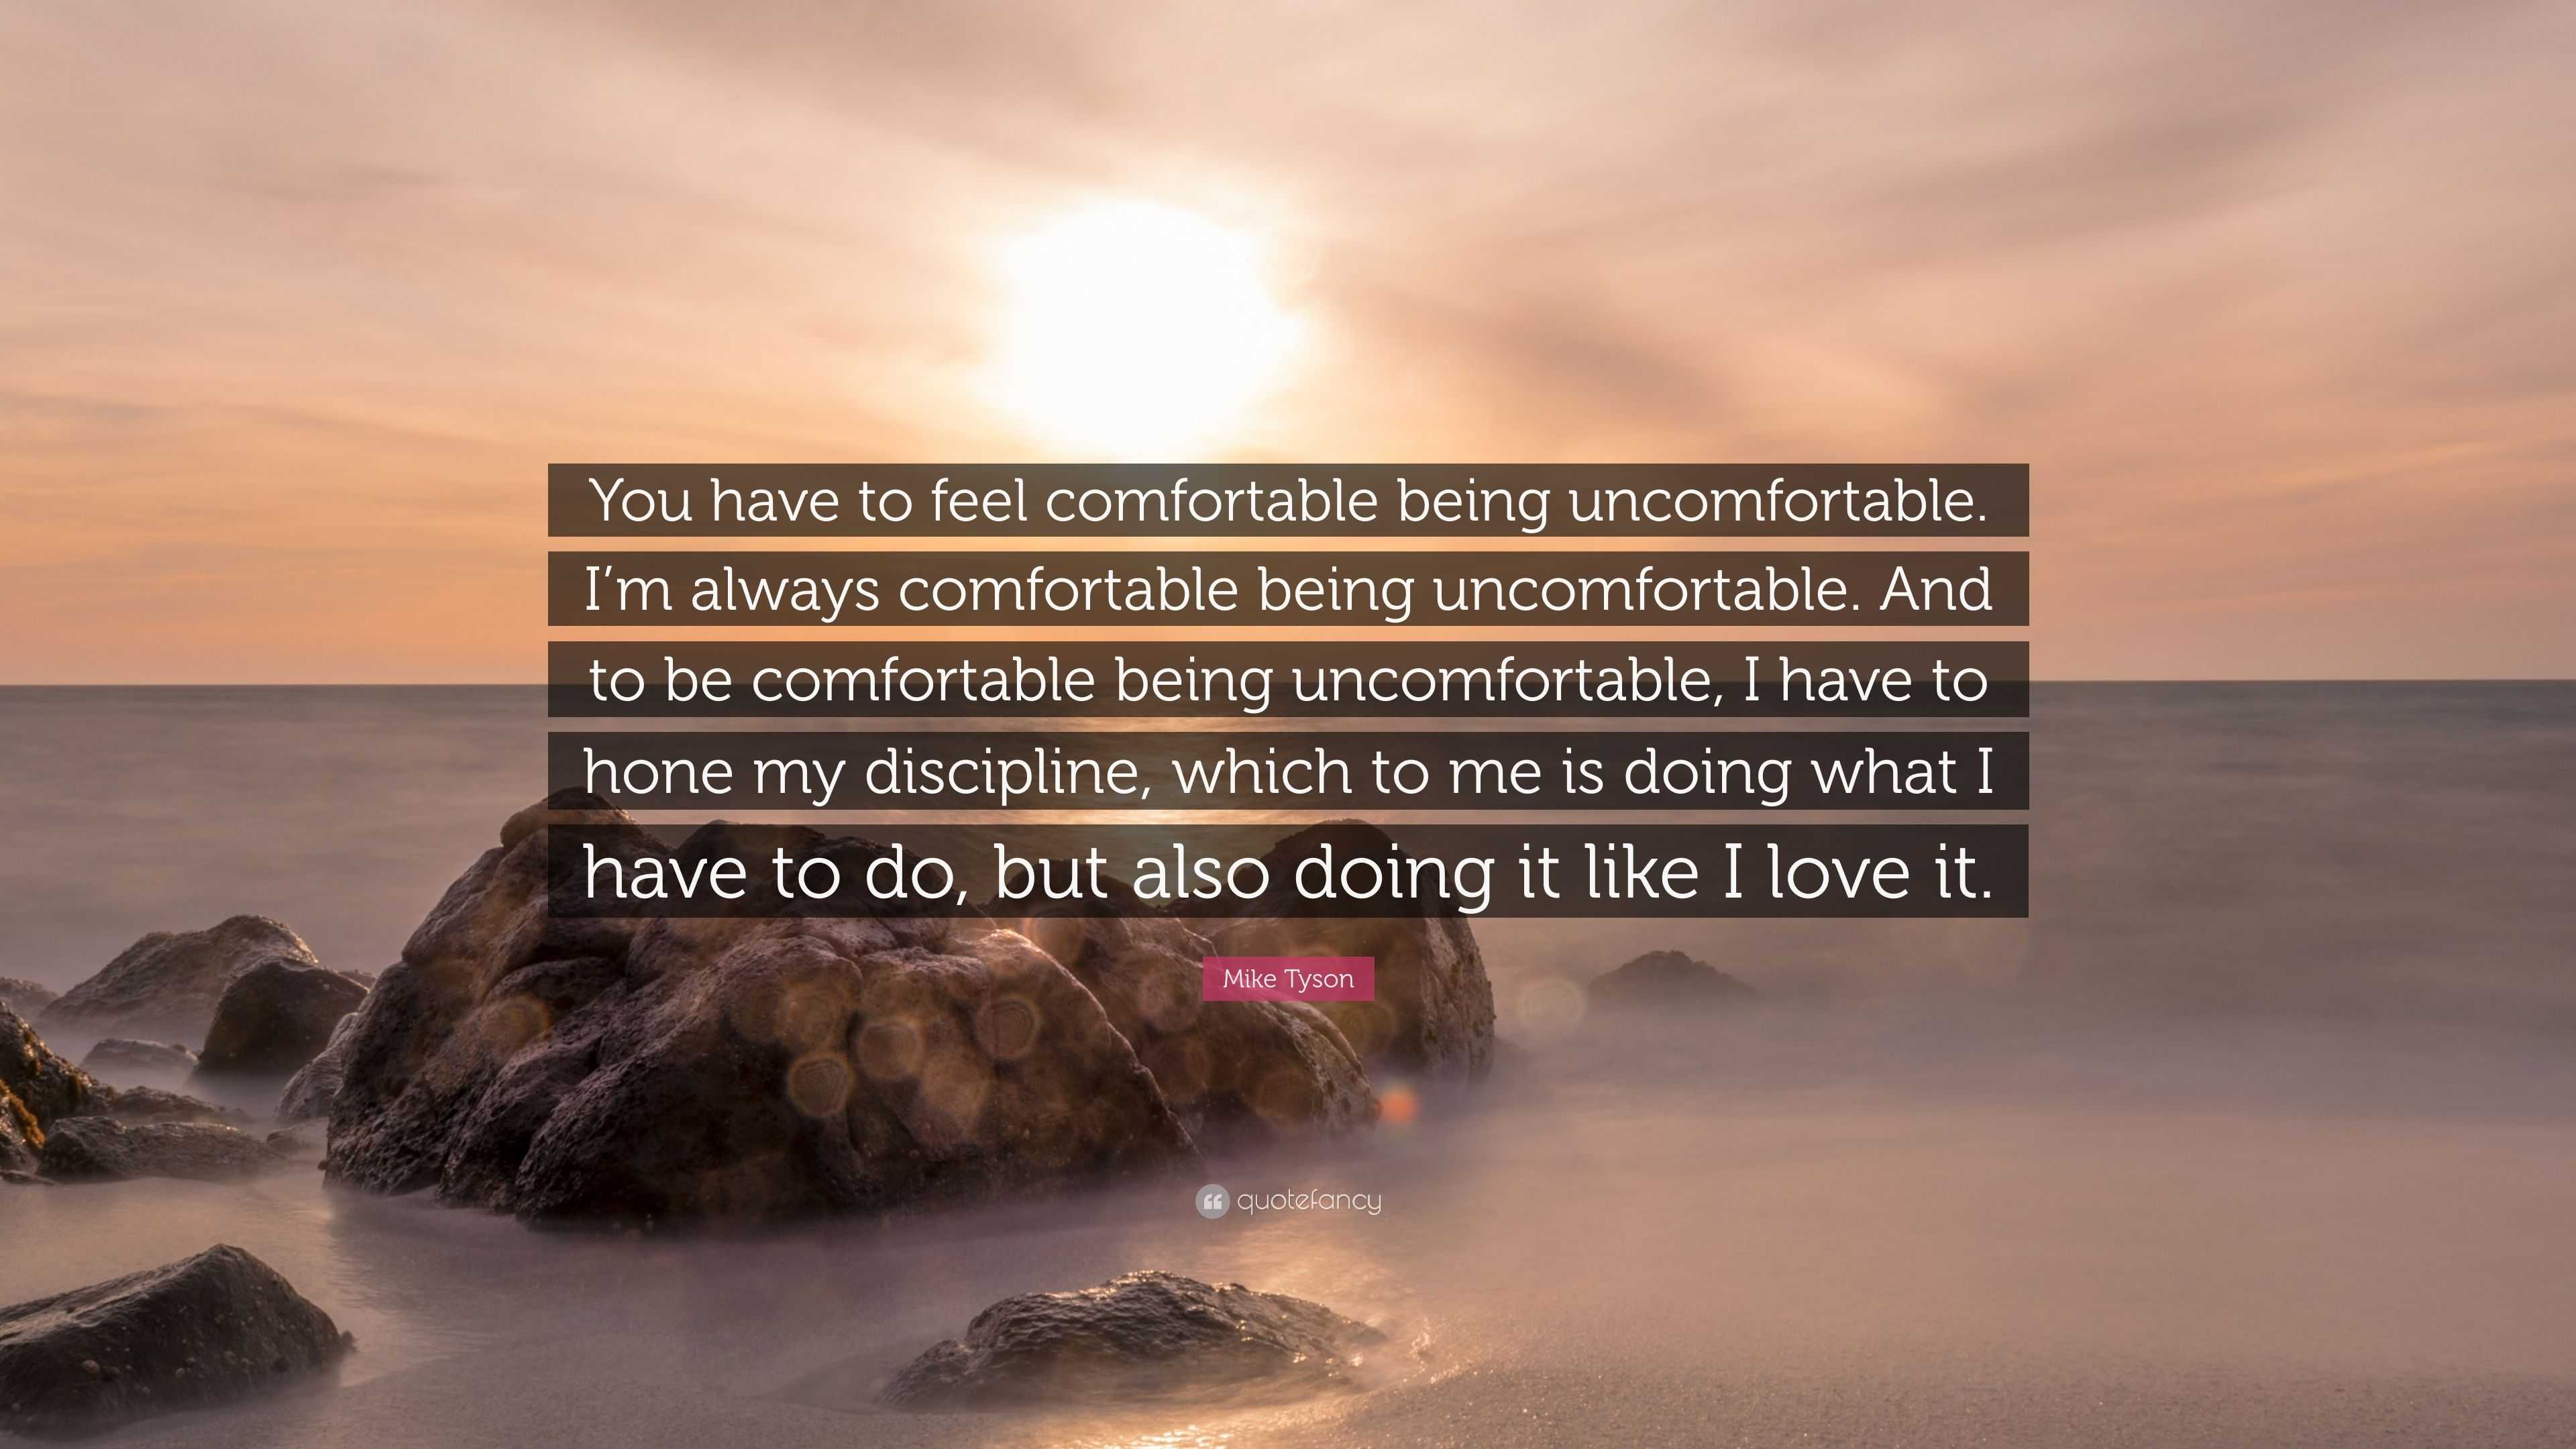 4842841 Mike Tyson Quote You have to feel comfortable being uncomfortable